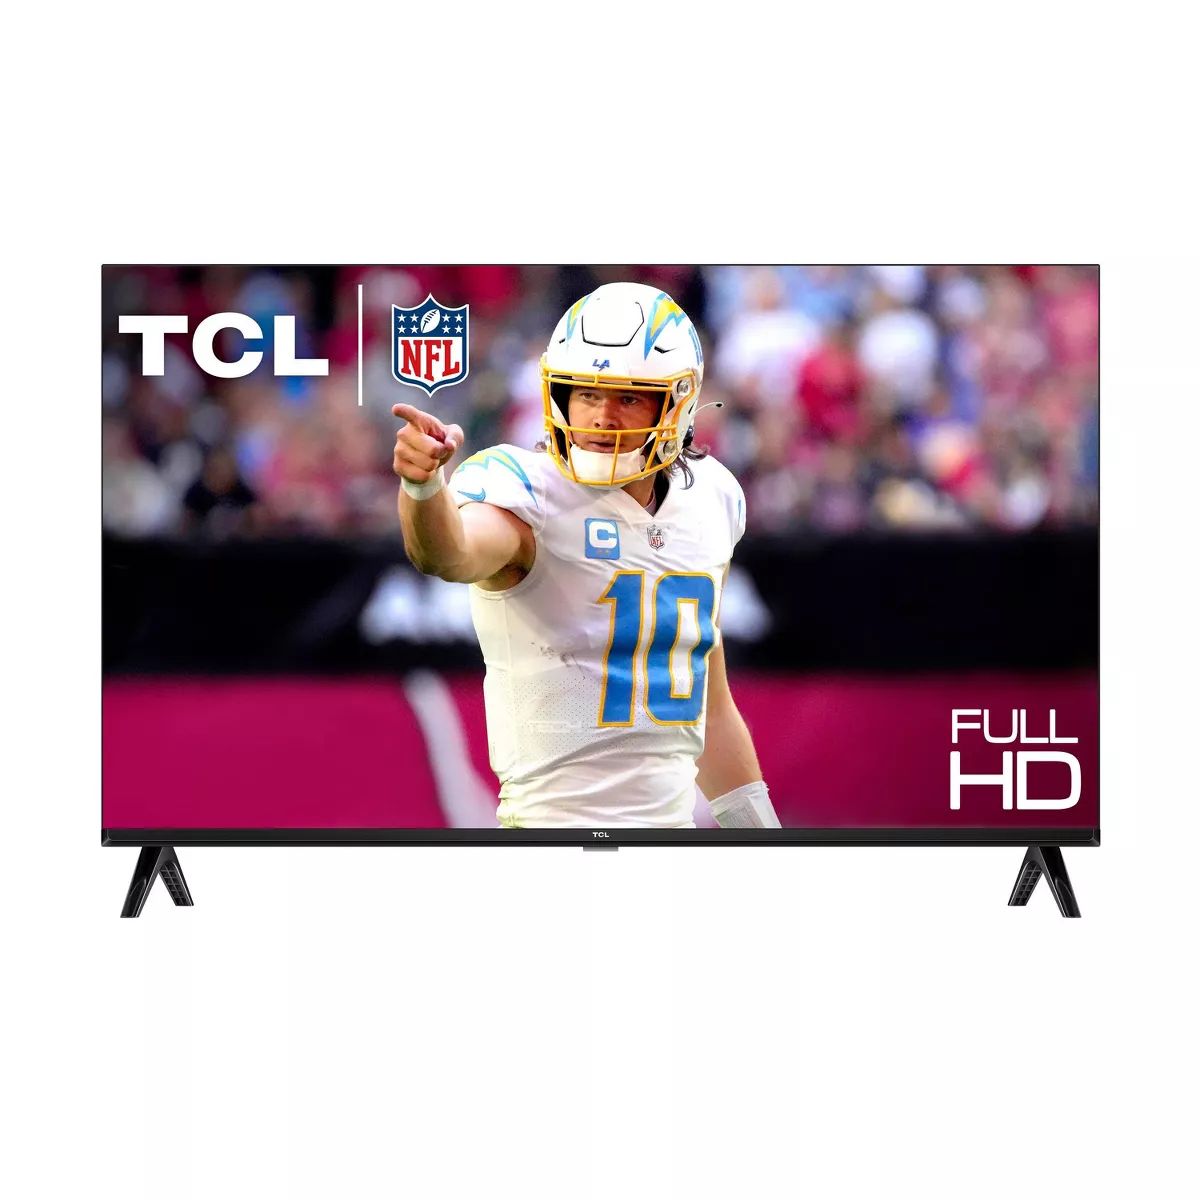 TCL 40" Class S3 S-Class 1080p FHD HDR LED Smart TV with Google TV - 40S350G | Target